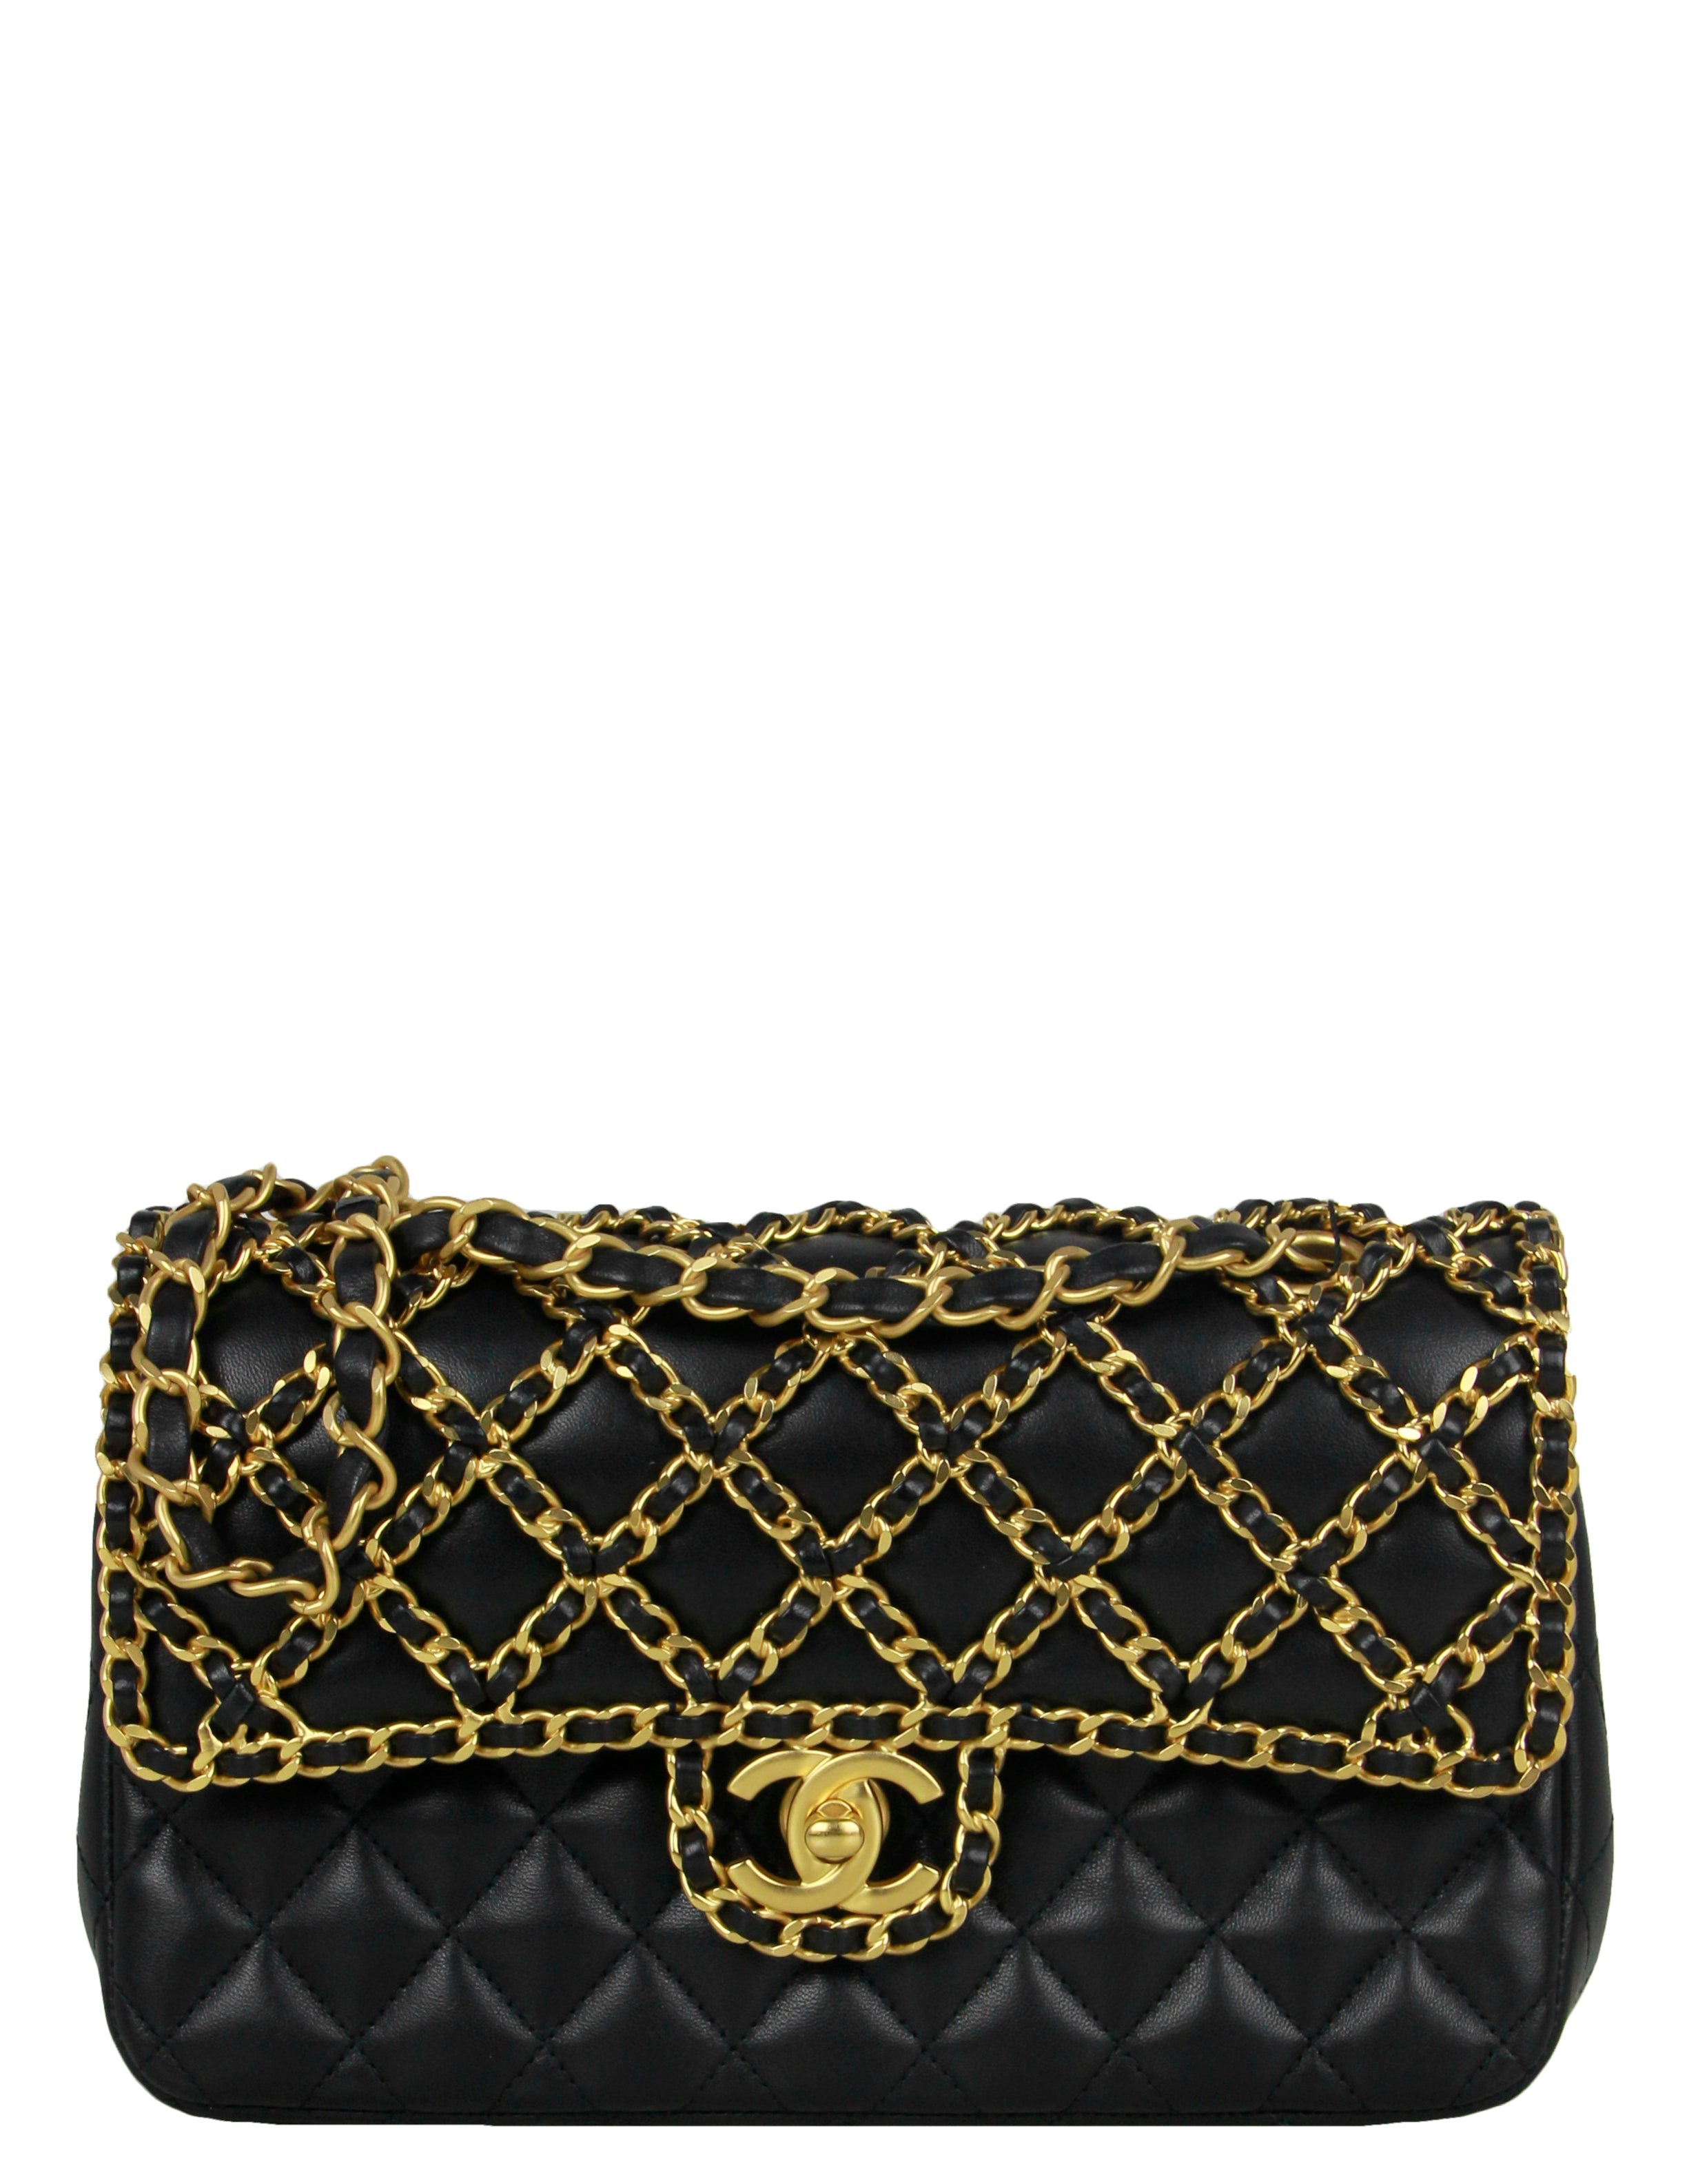 Chanel Black Lambskin Leather Classic Cage Woven Chain Flap Bag